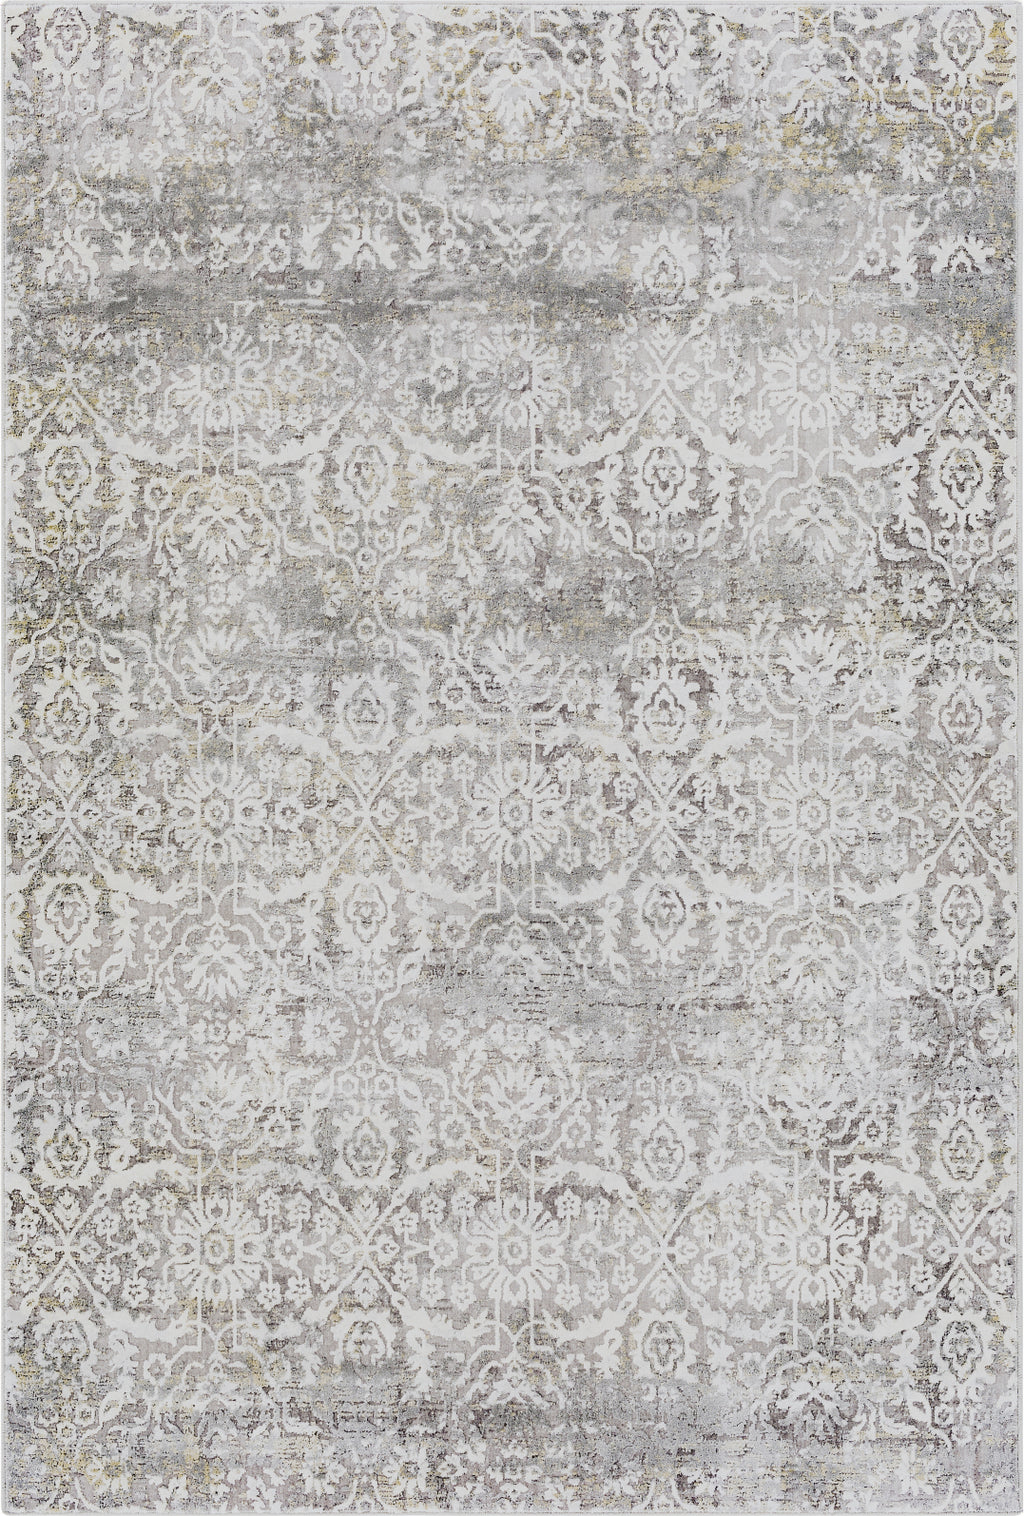 Surya Norland NLD-2315 Area Rug by Artistic Weavers main image